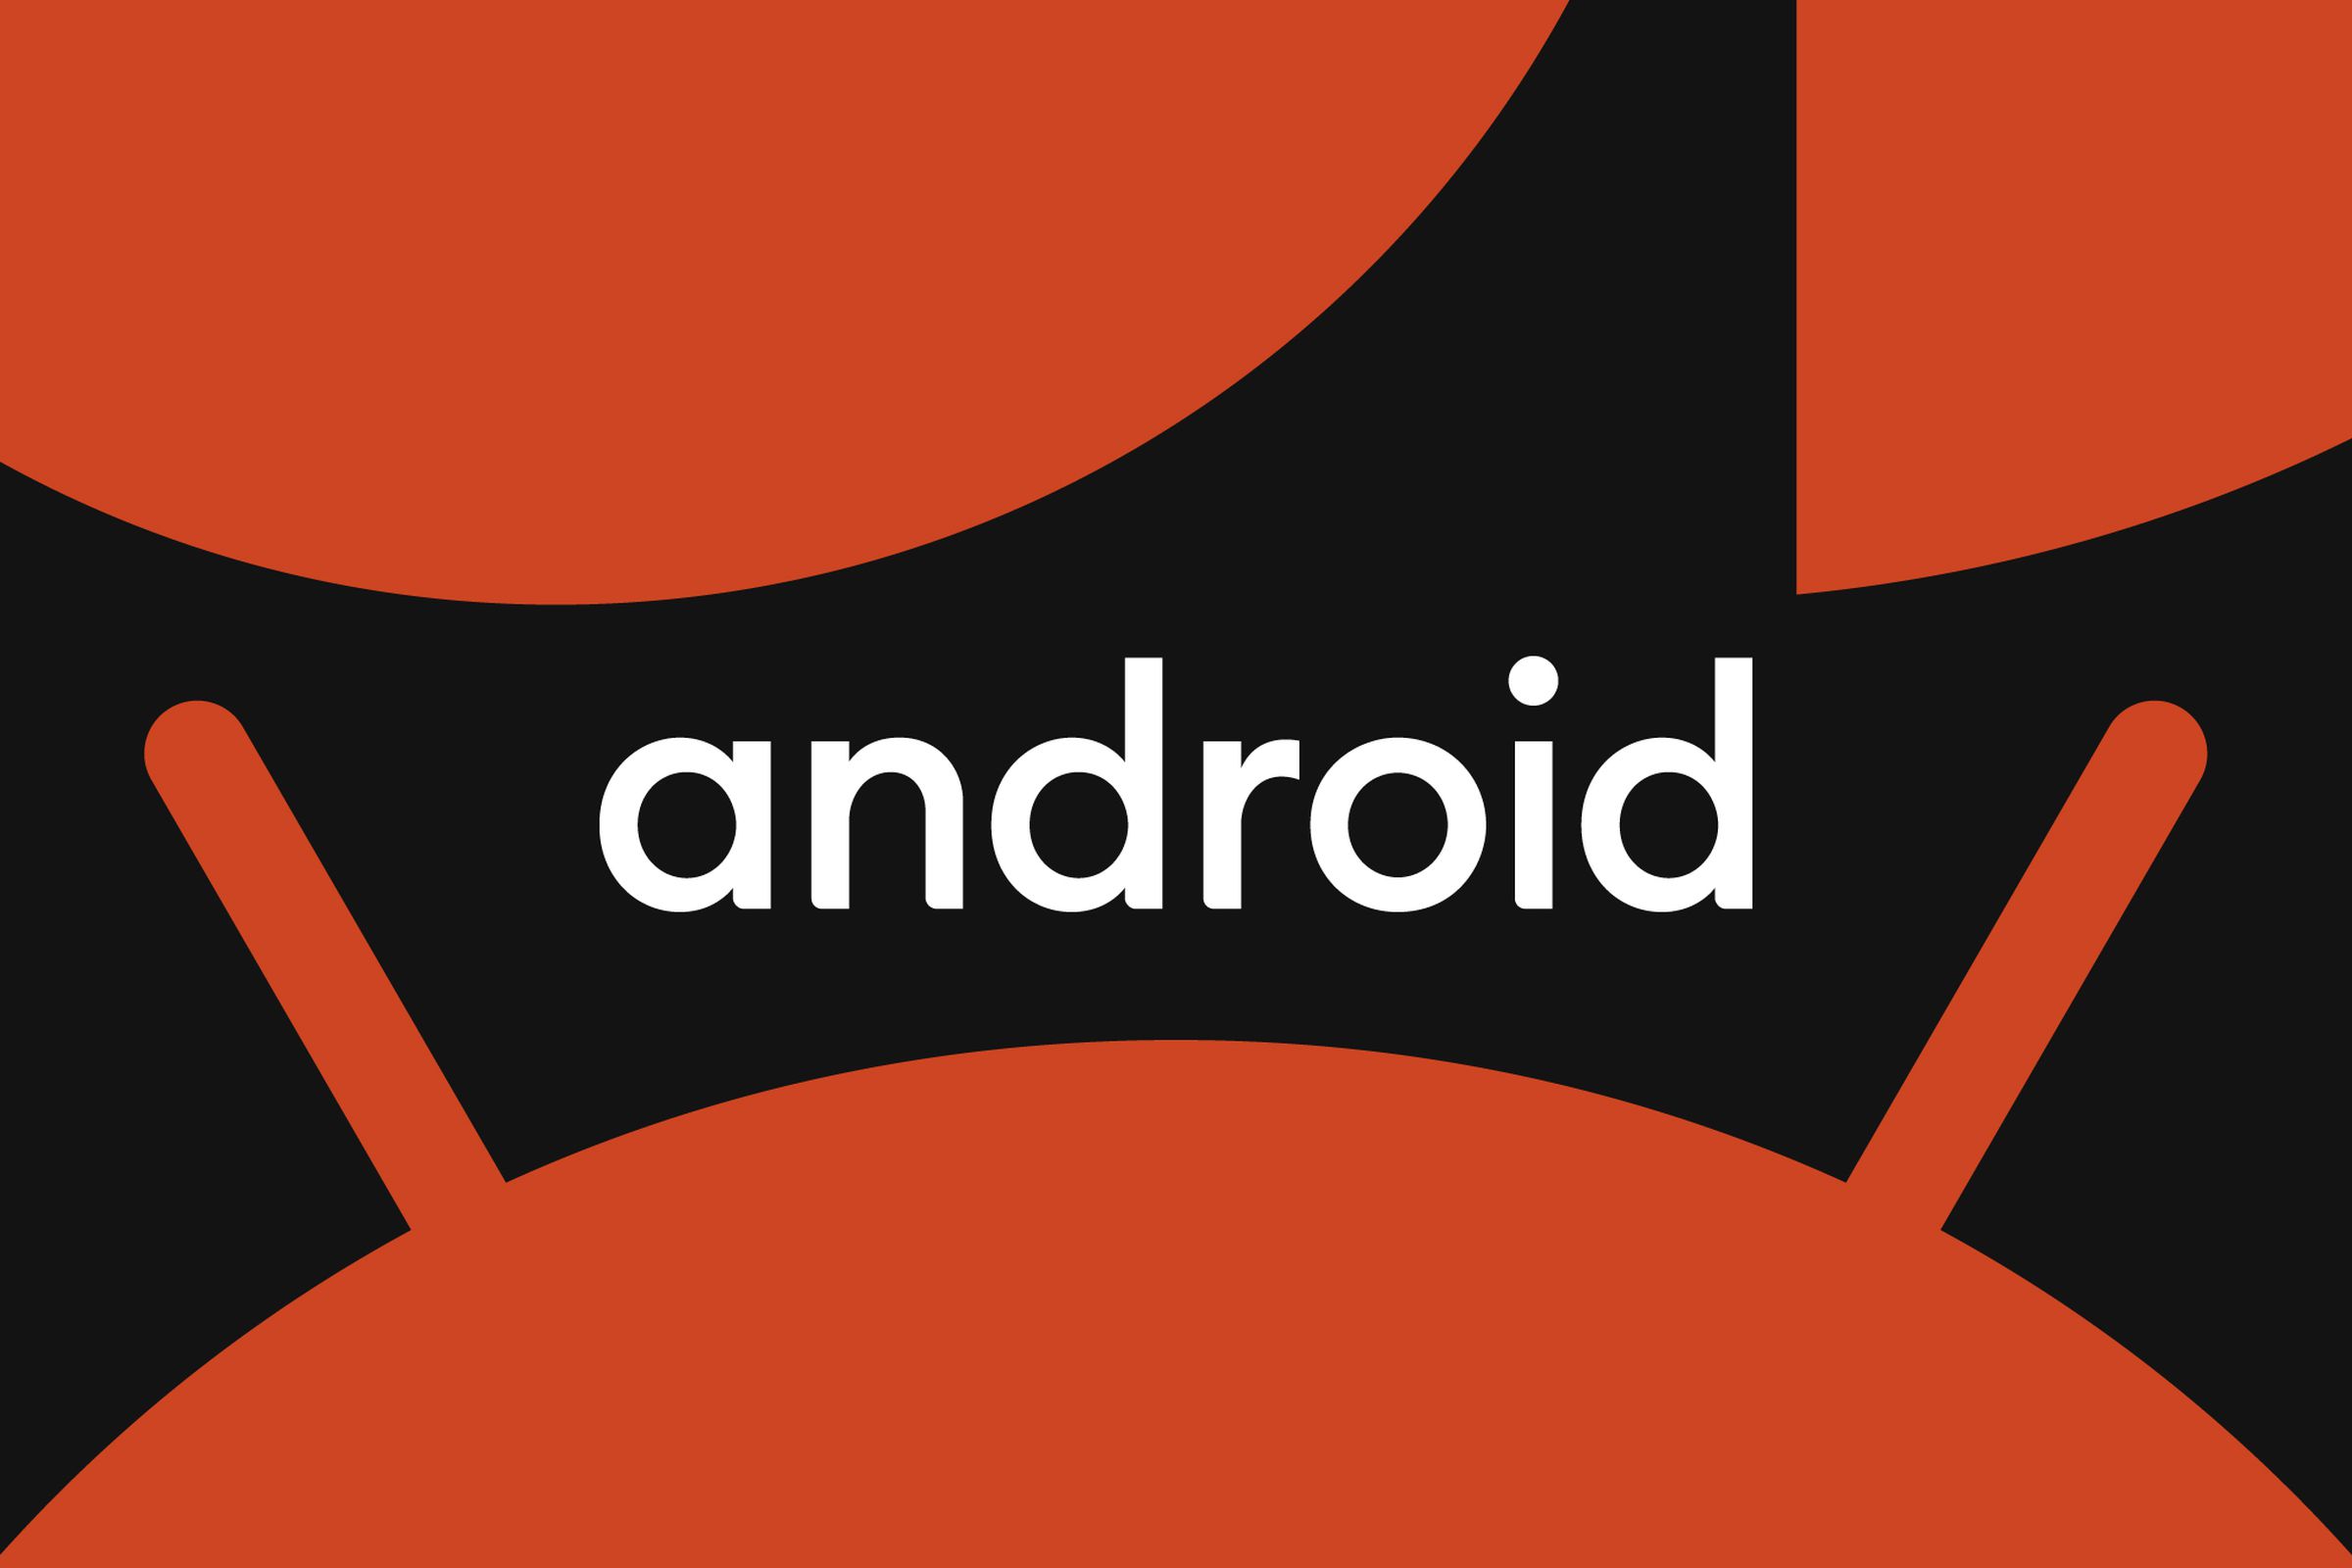 The Android logo on a black backdrop, surrounded by red shapes that resemble the Android mascot.